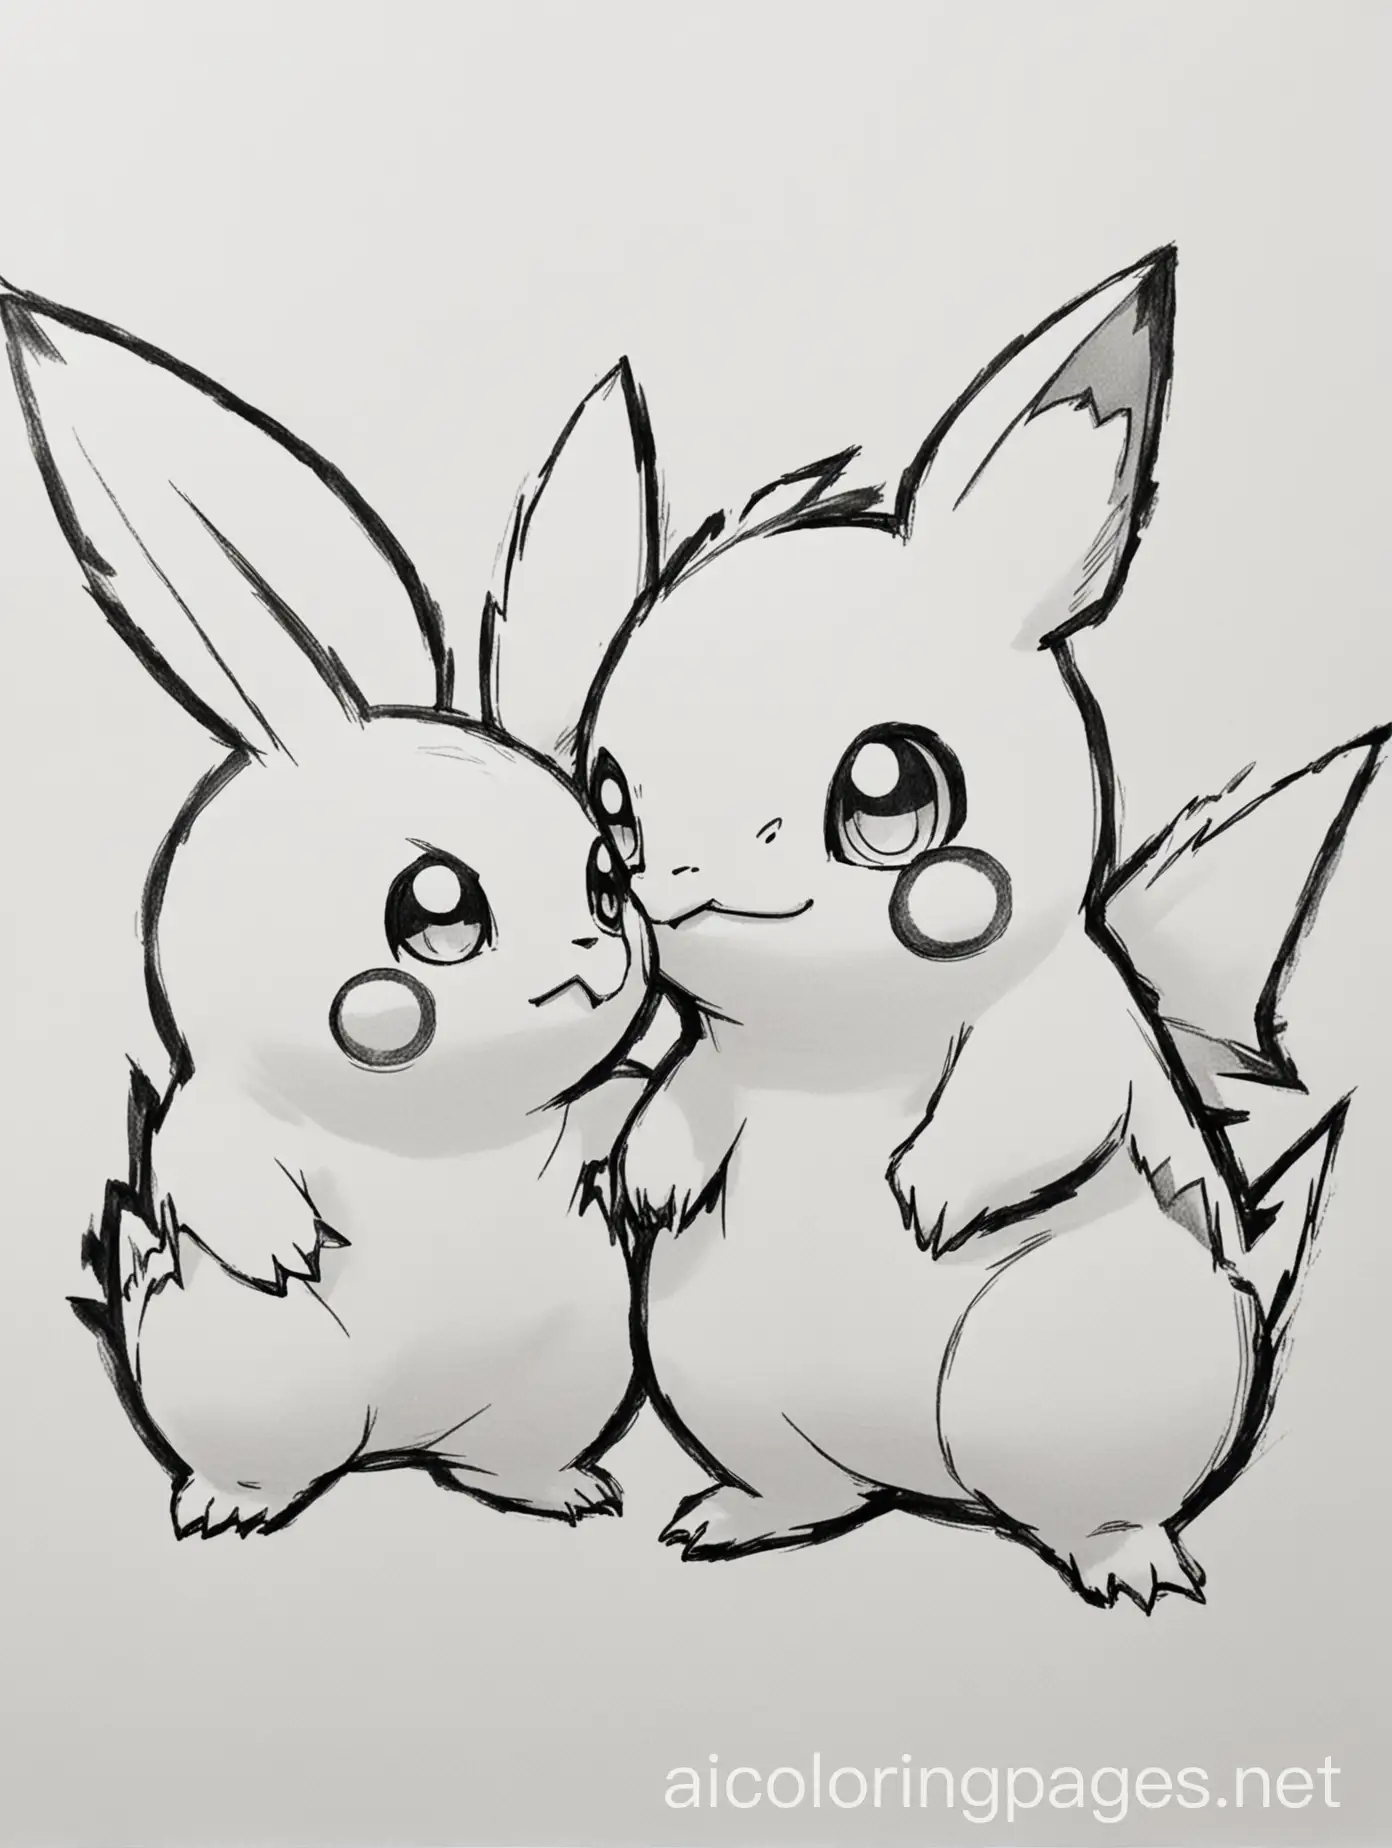 Zwei Pokémon. Sehr einfache Zeichnung. Dicke Linien, ohne viel Details., Coloring Page, black and white, line art, white background, Simplicity, Ample White Space. The background of the coloring page is plain white to make it easy for young children to color within the lines. The outlines of all the subjects are easy to distinguish, making it simple for kids to color without too much difficulty